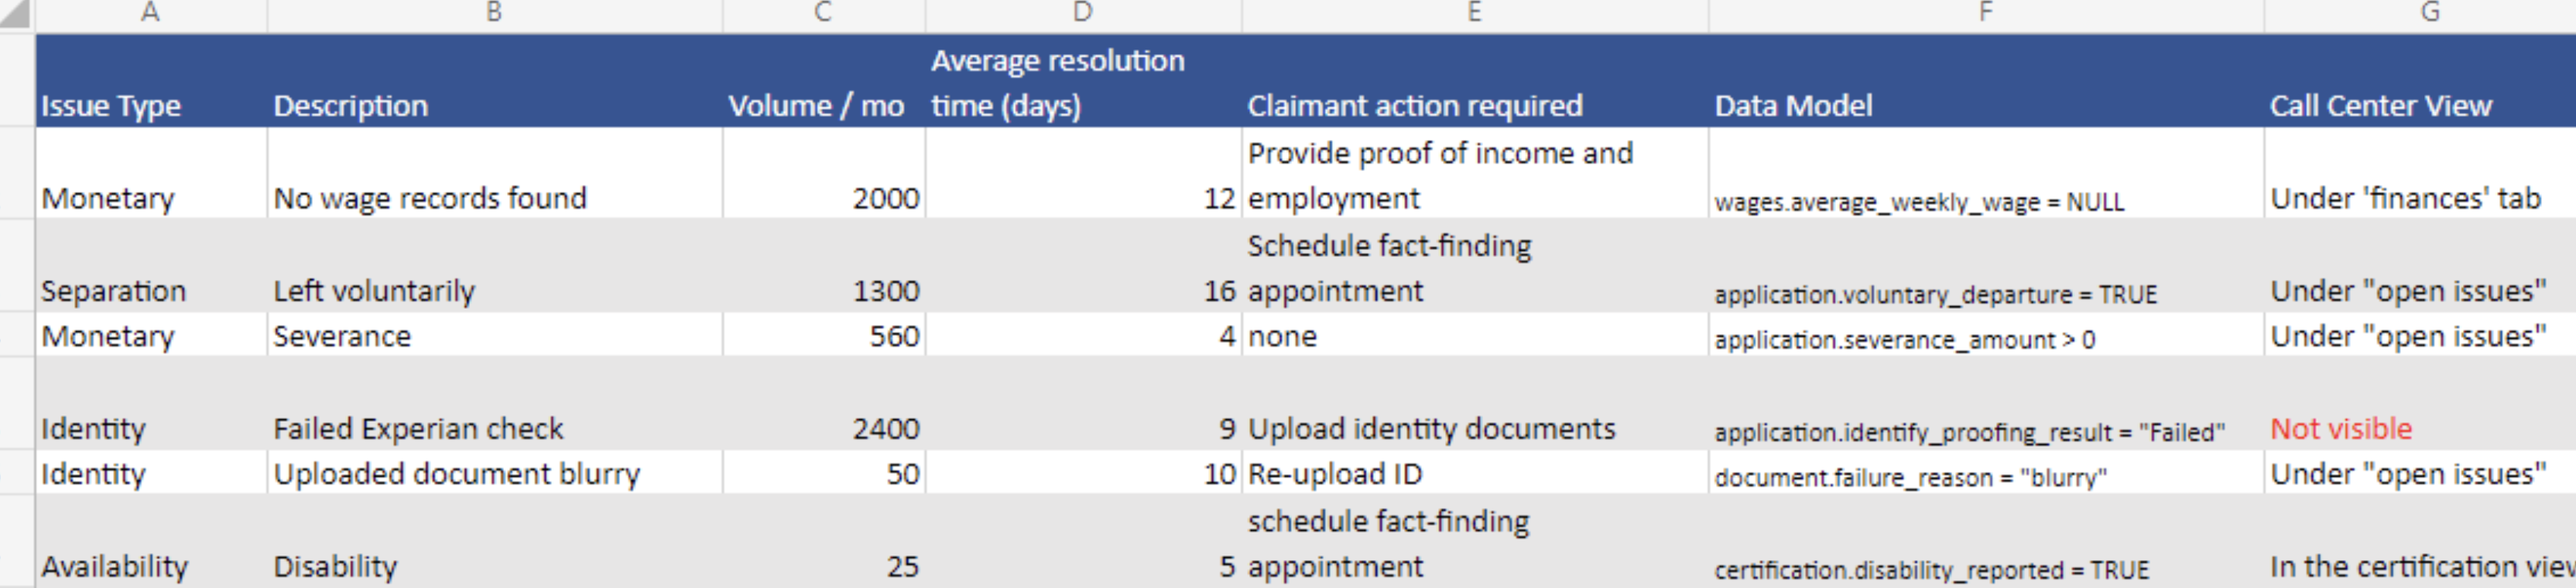 A spreadsheet showing an example issue documentation exercise with columns named 'issue', 'description', 'volume', 'average resolution time', 'claimant action required', 'data model', and 'call center view'.